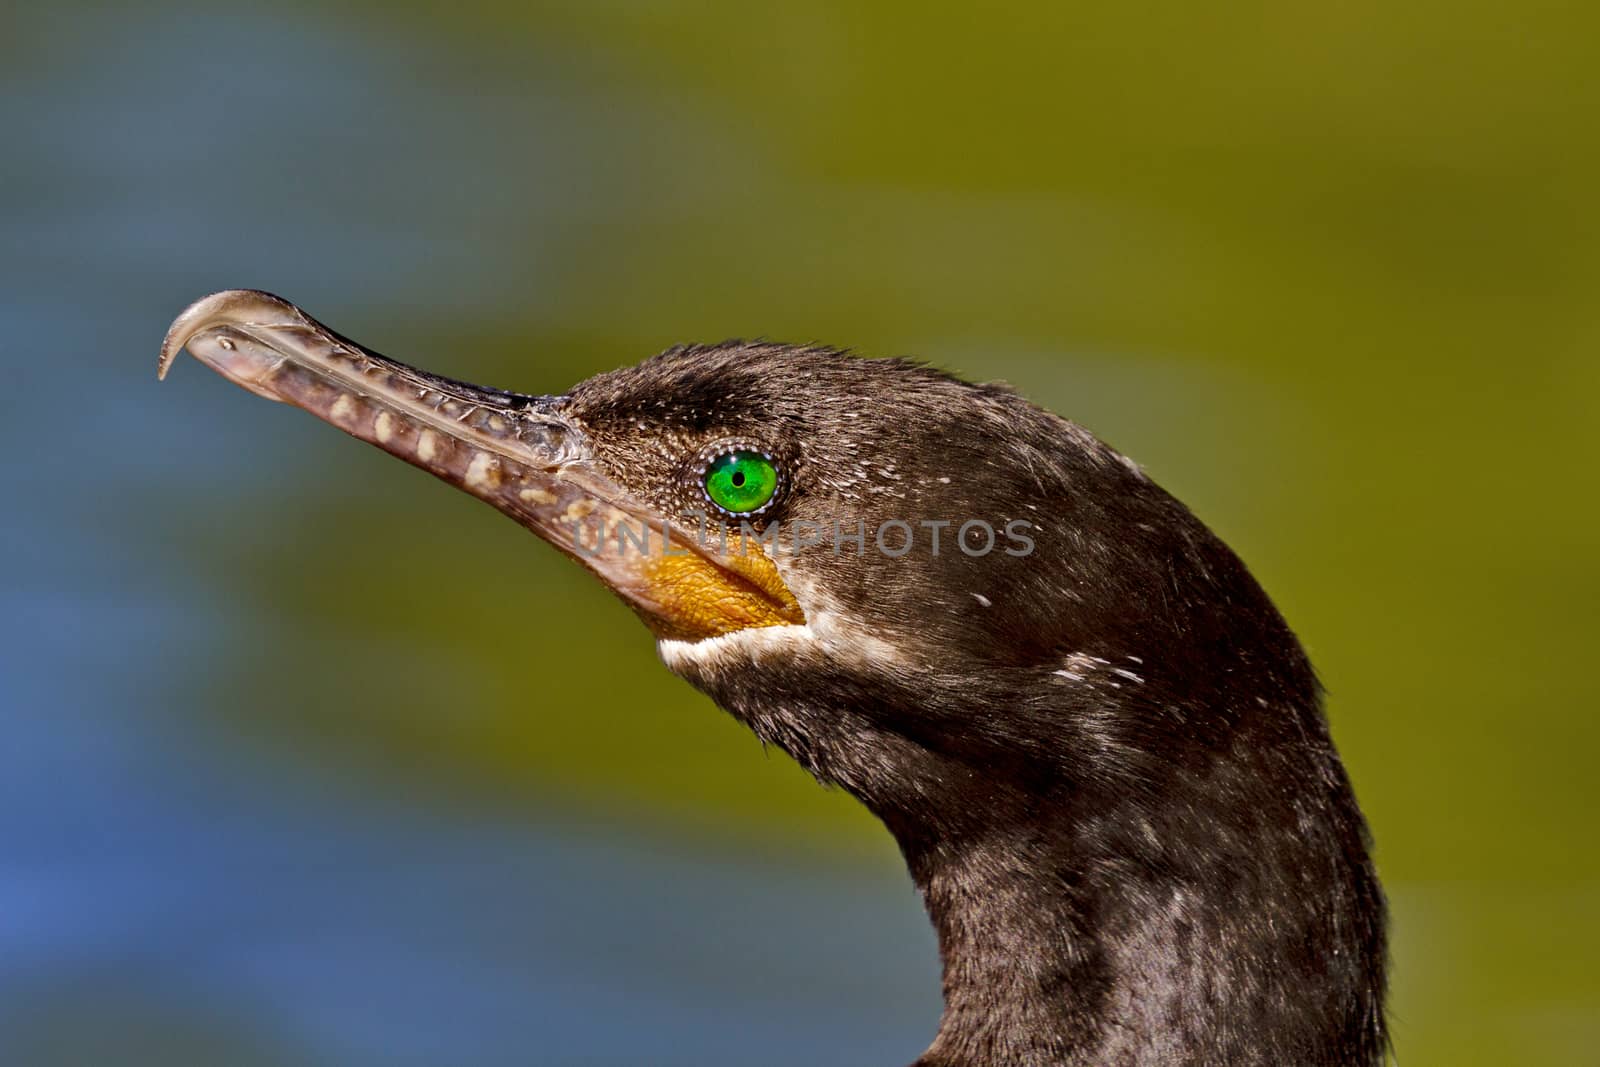 Portrait of adult cormorant with beautiful green eyes.  Location is Reid Park in Tucson, Arizona, on February 24, 2017.  Closeup focus on bird with green and blue in water background.